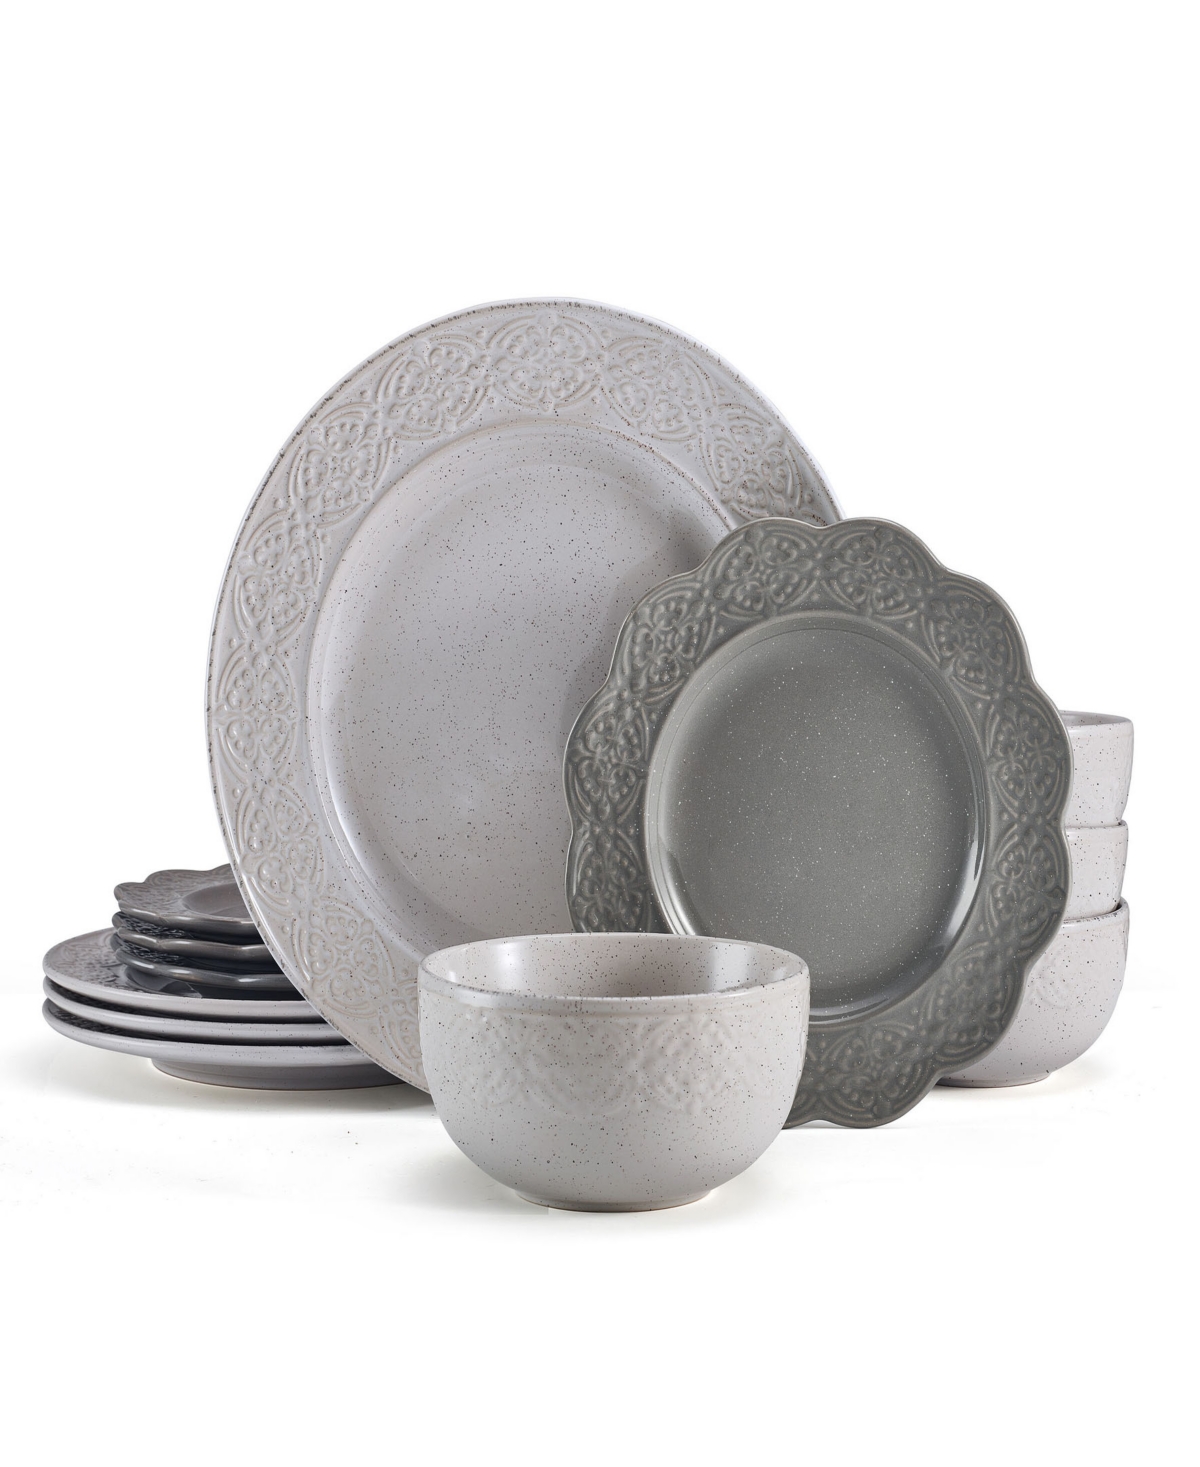 Gia 12-Pc Dinnerware Set, Service for 4 - Assorted